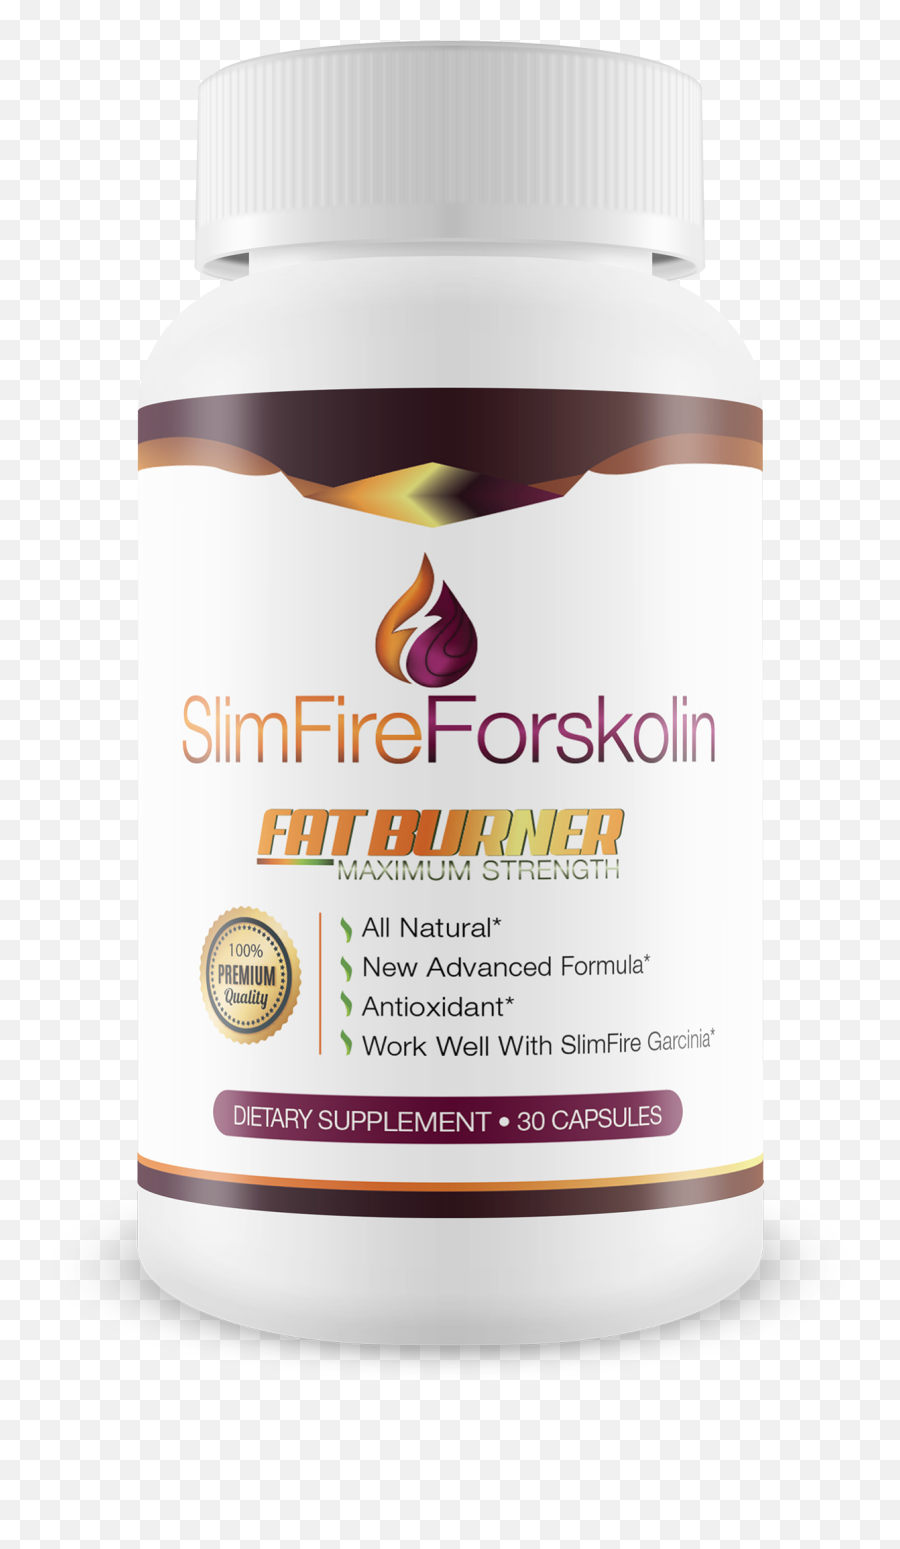 Garcinia Active Slim - Weight Loss Pills Reduce Appetite Emoji,Fats With Emotion Faces